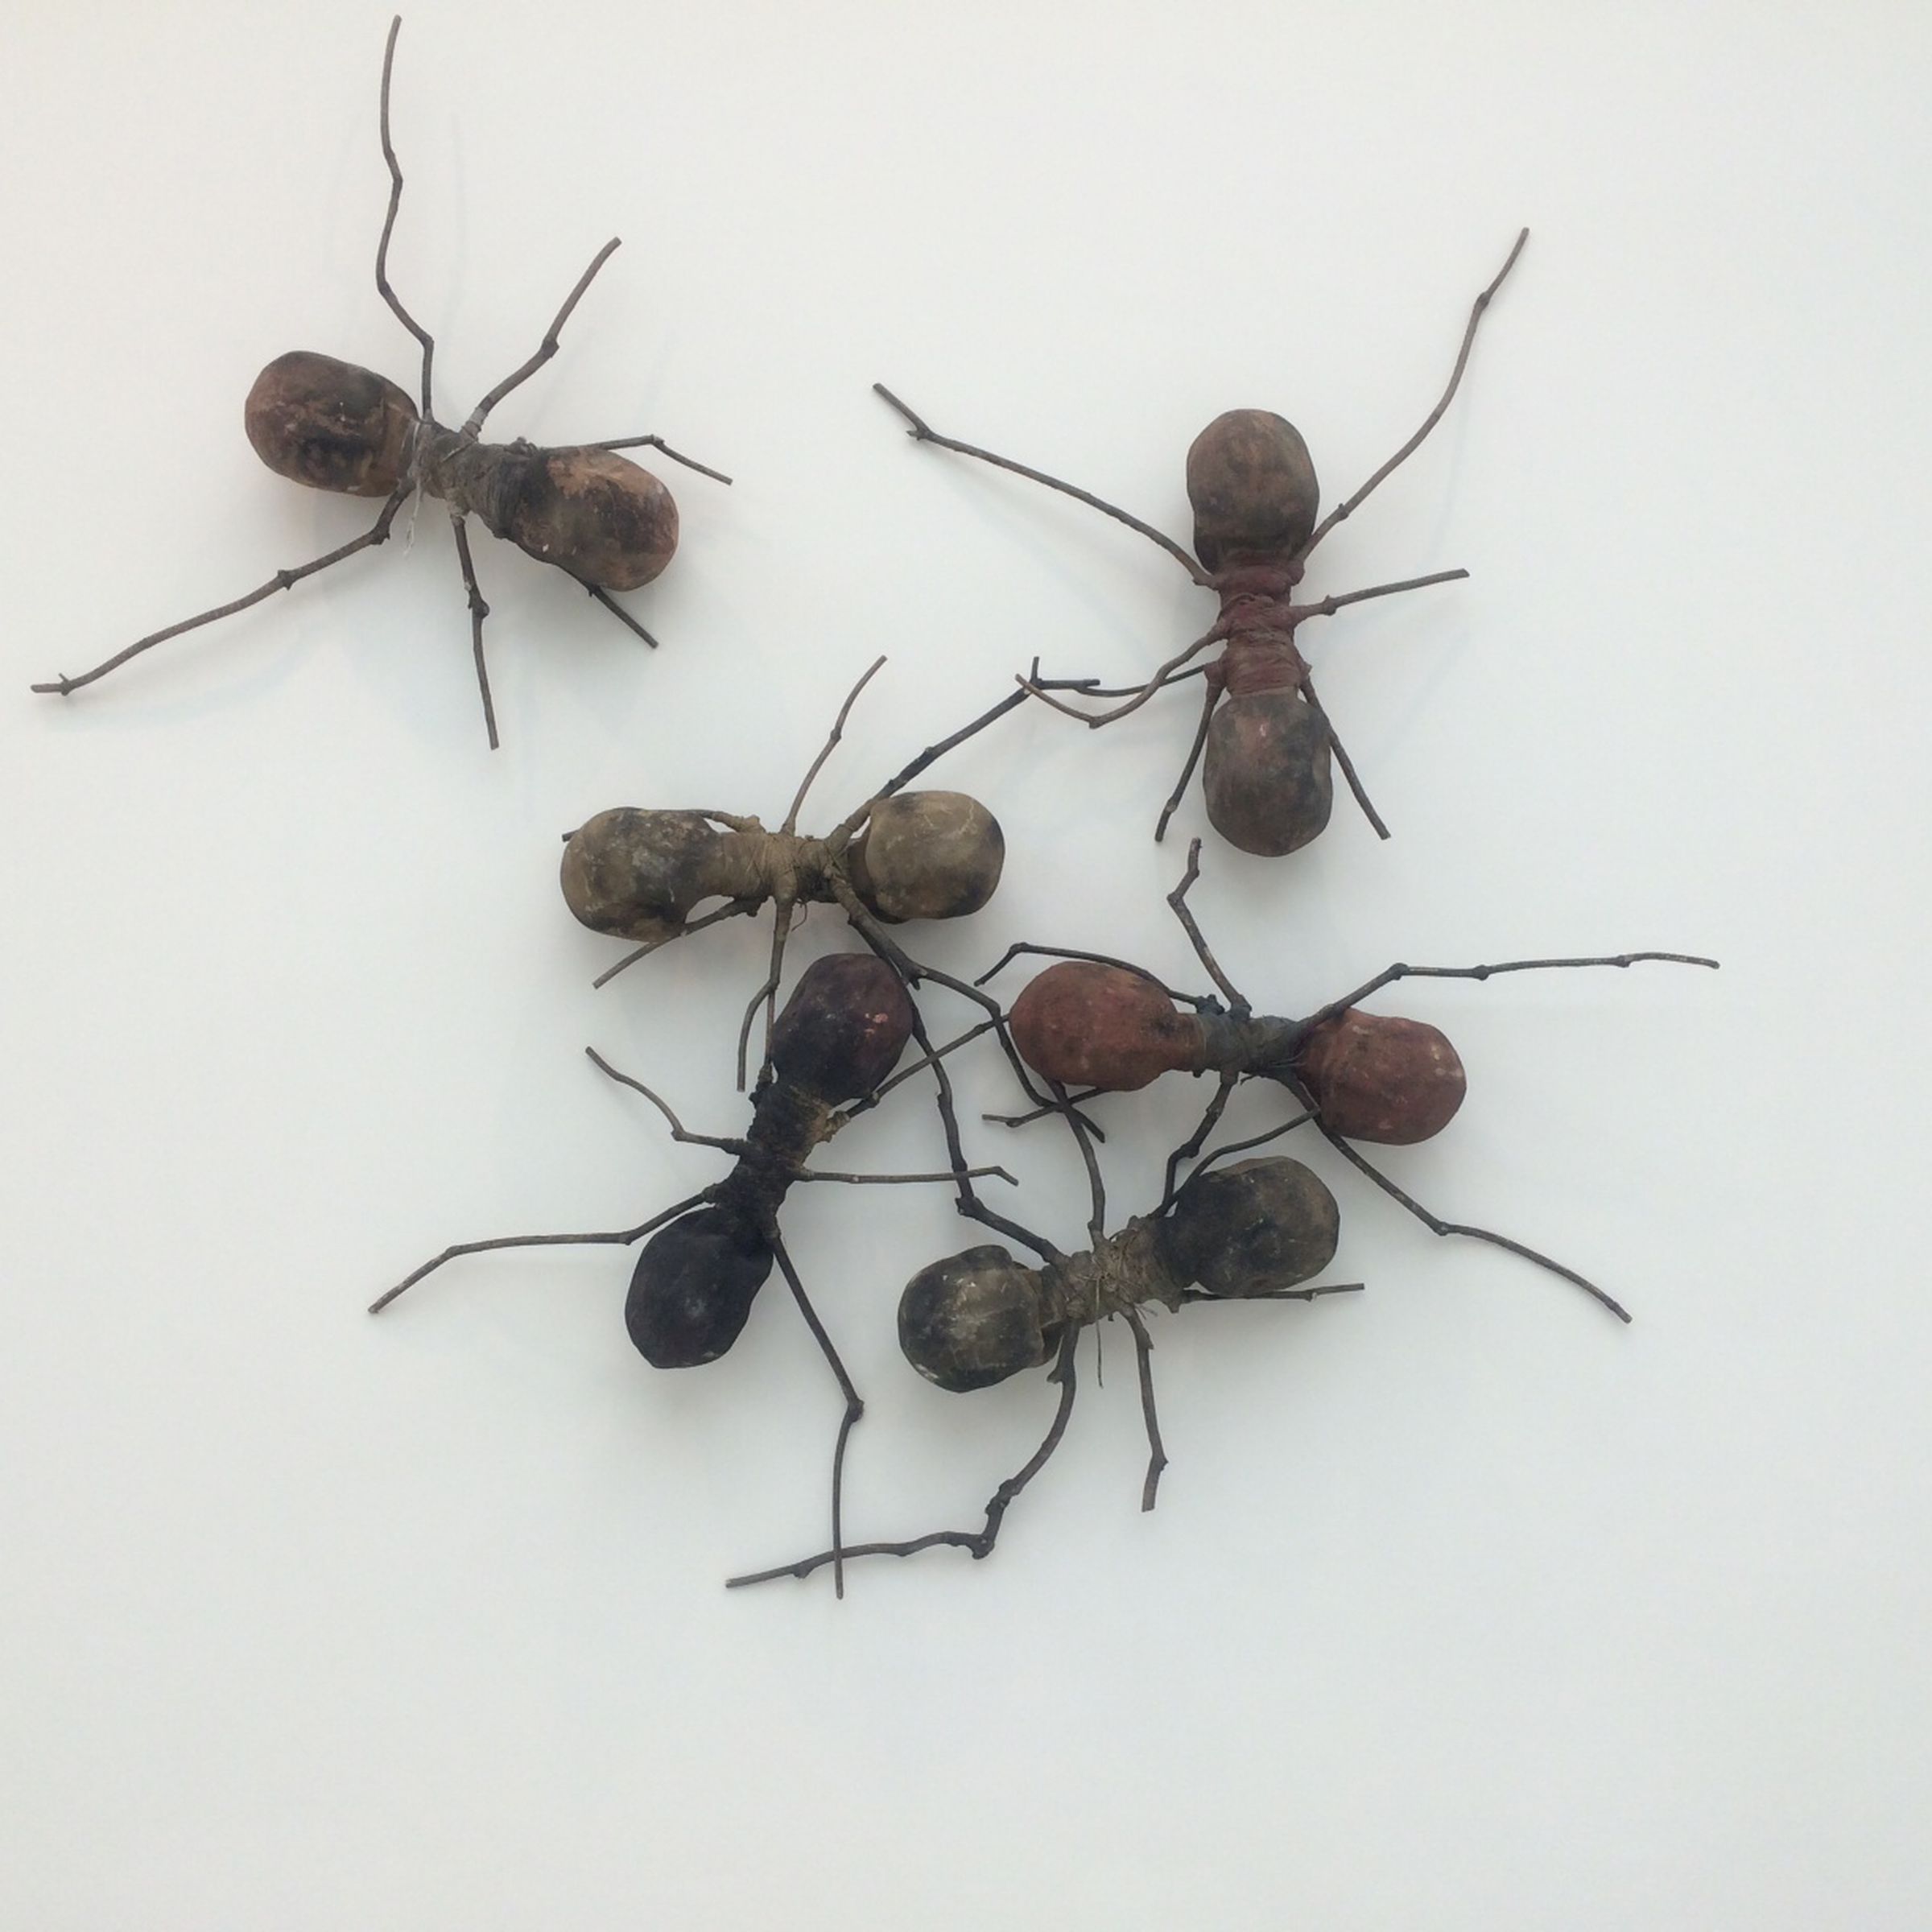 Colombia’s giant ants